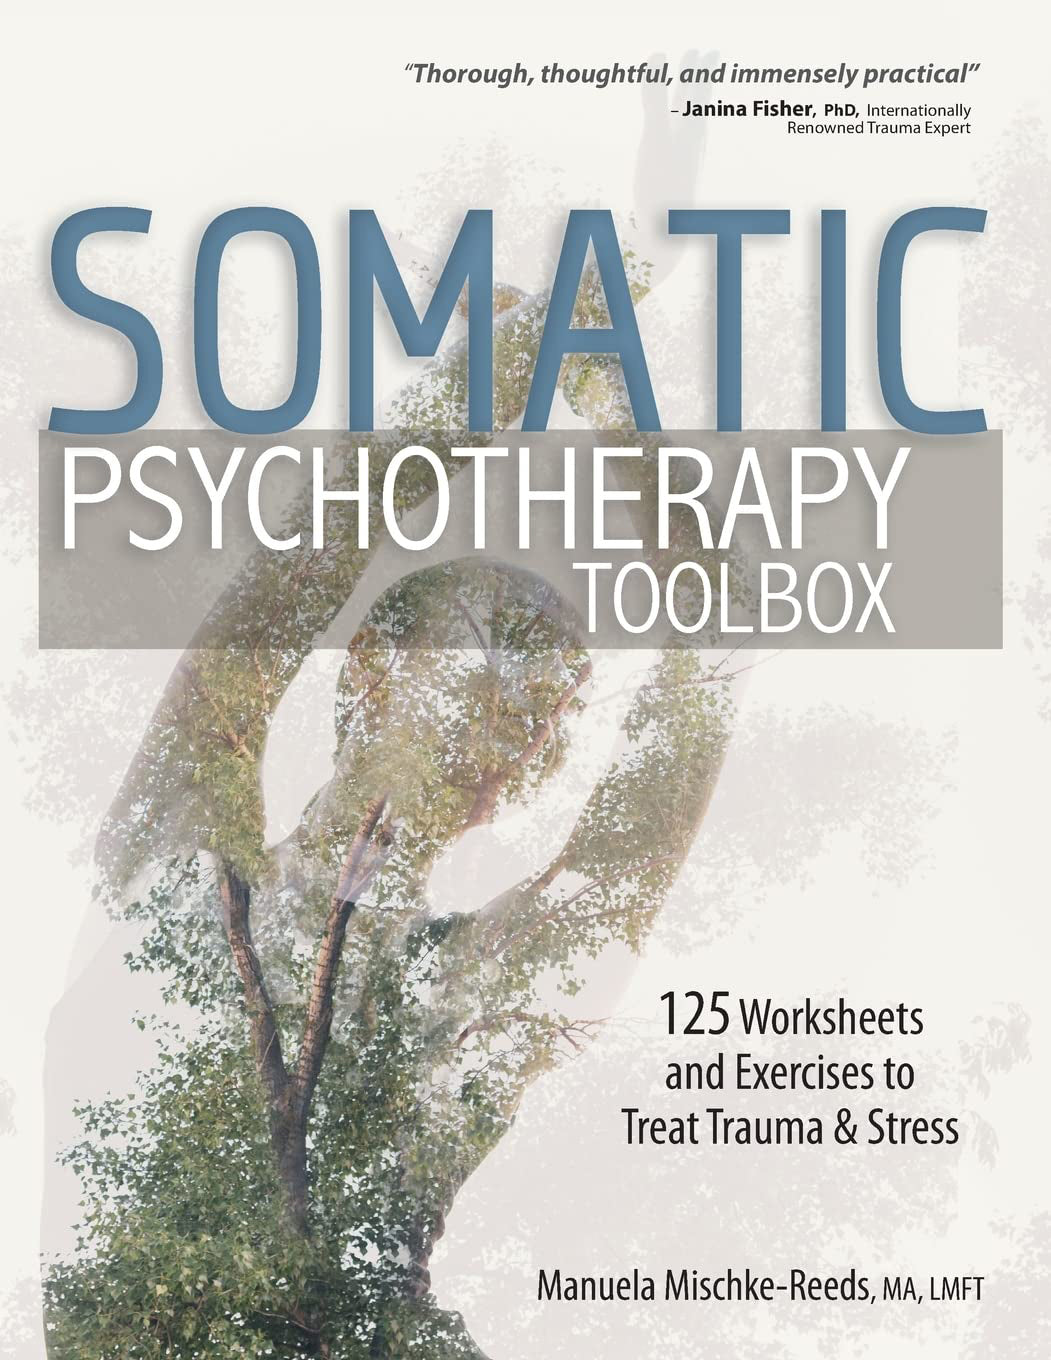 Somatic psychotherapy toolbox : 125 worksheets and exercises to treat trauma & stress